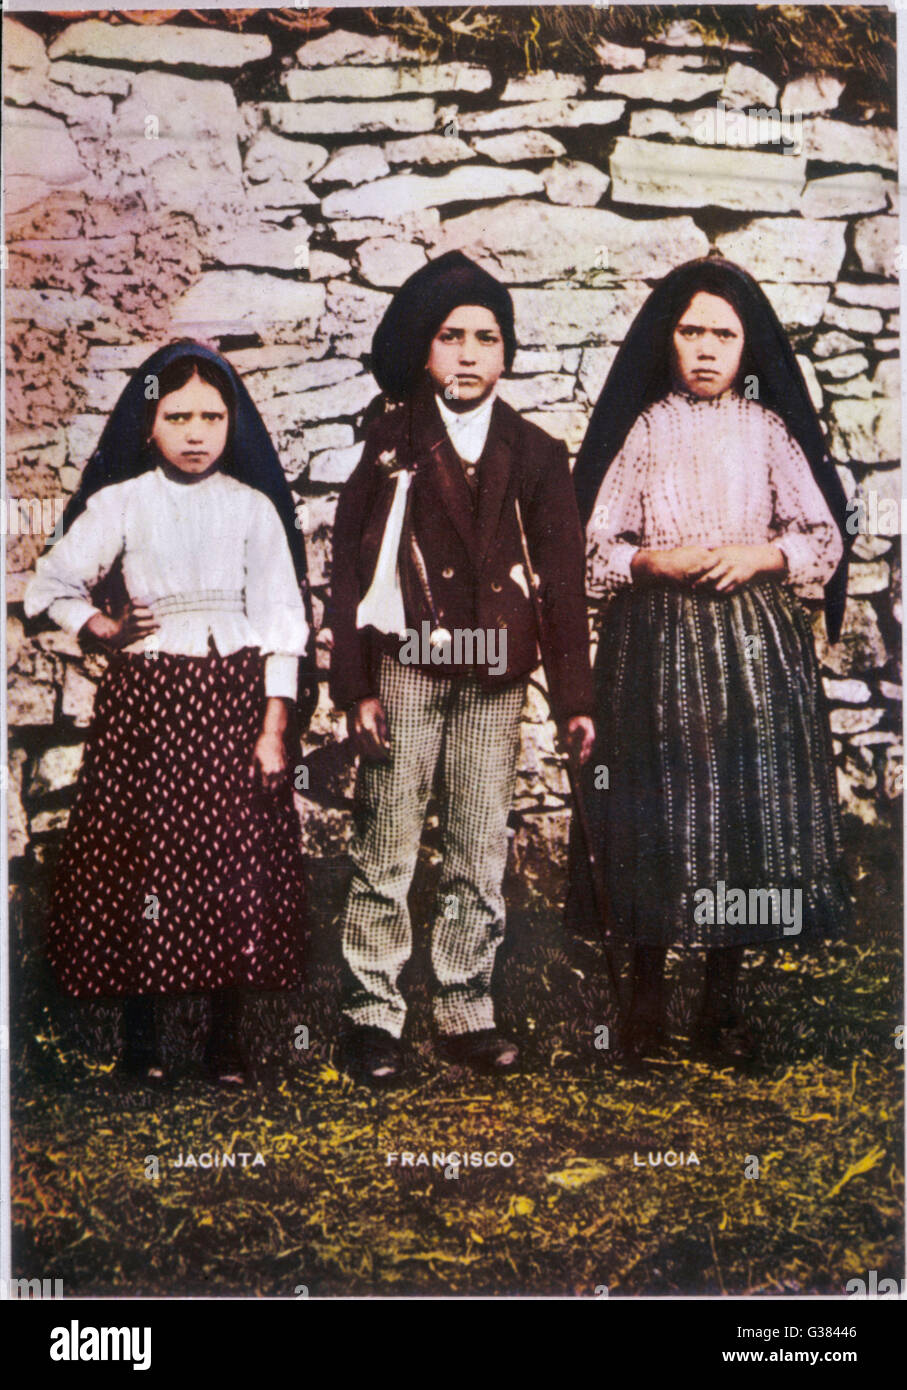 The three children, Jacinta,  Francisco and Lucia, who saw  the vision of Fatima in  Portugal.      Date: 1917 Stock Photo